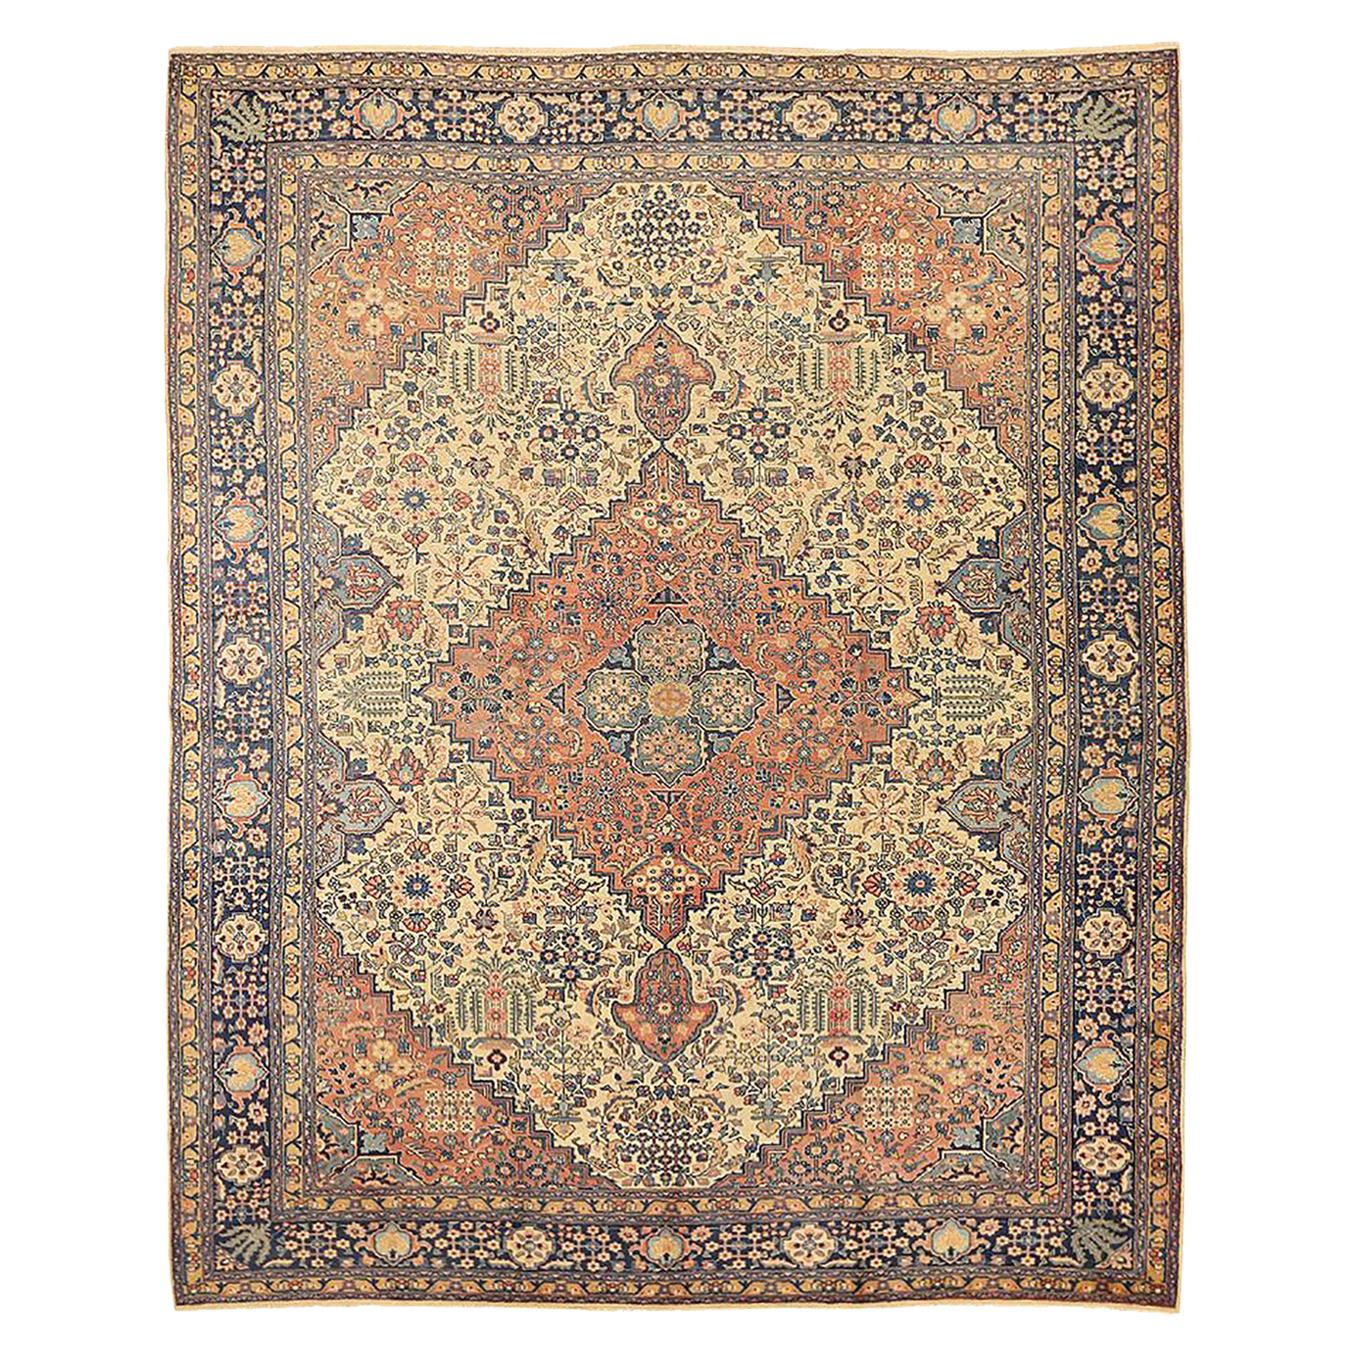 Antique Persian Tabriz Rug with Beige and Navy Flower Details Over Ivory Field